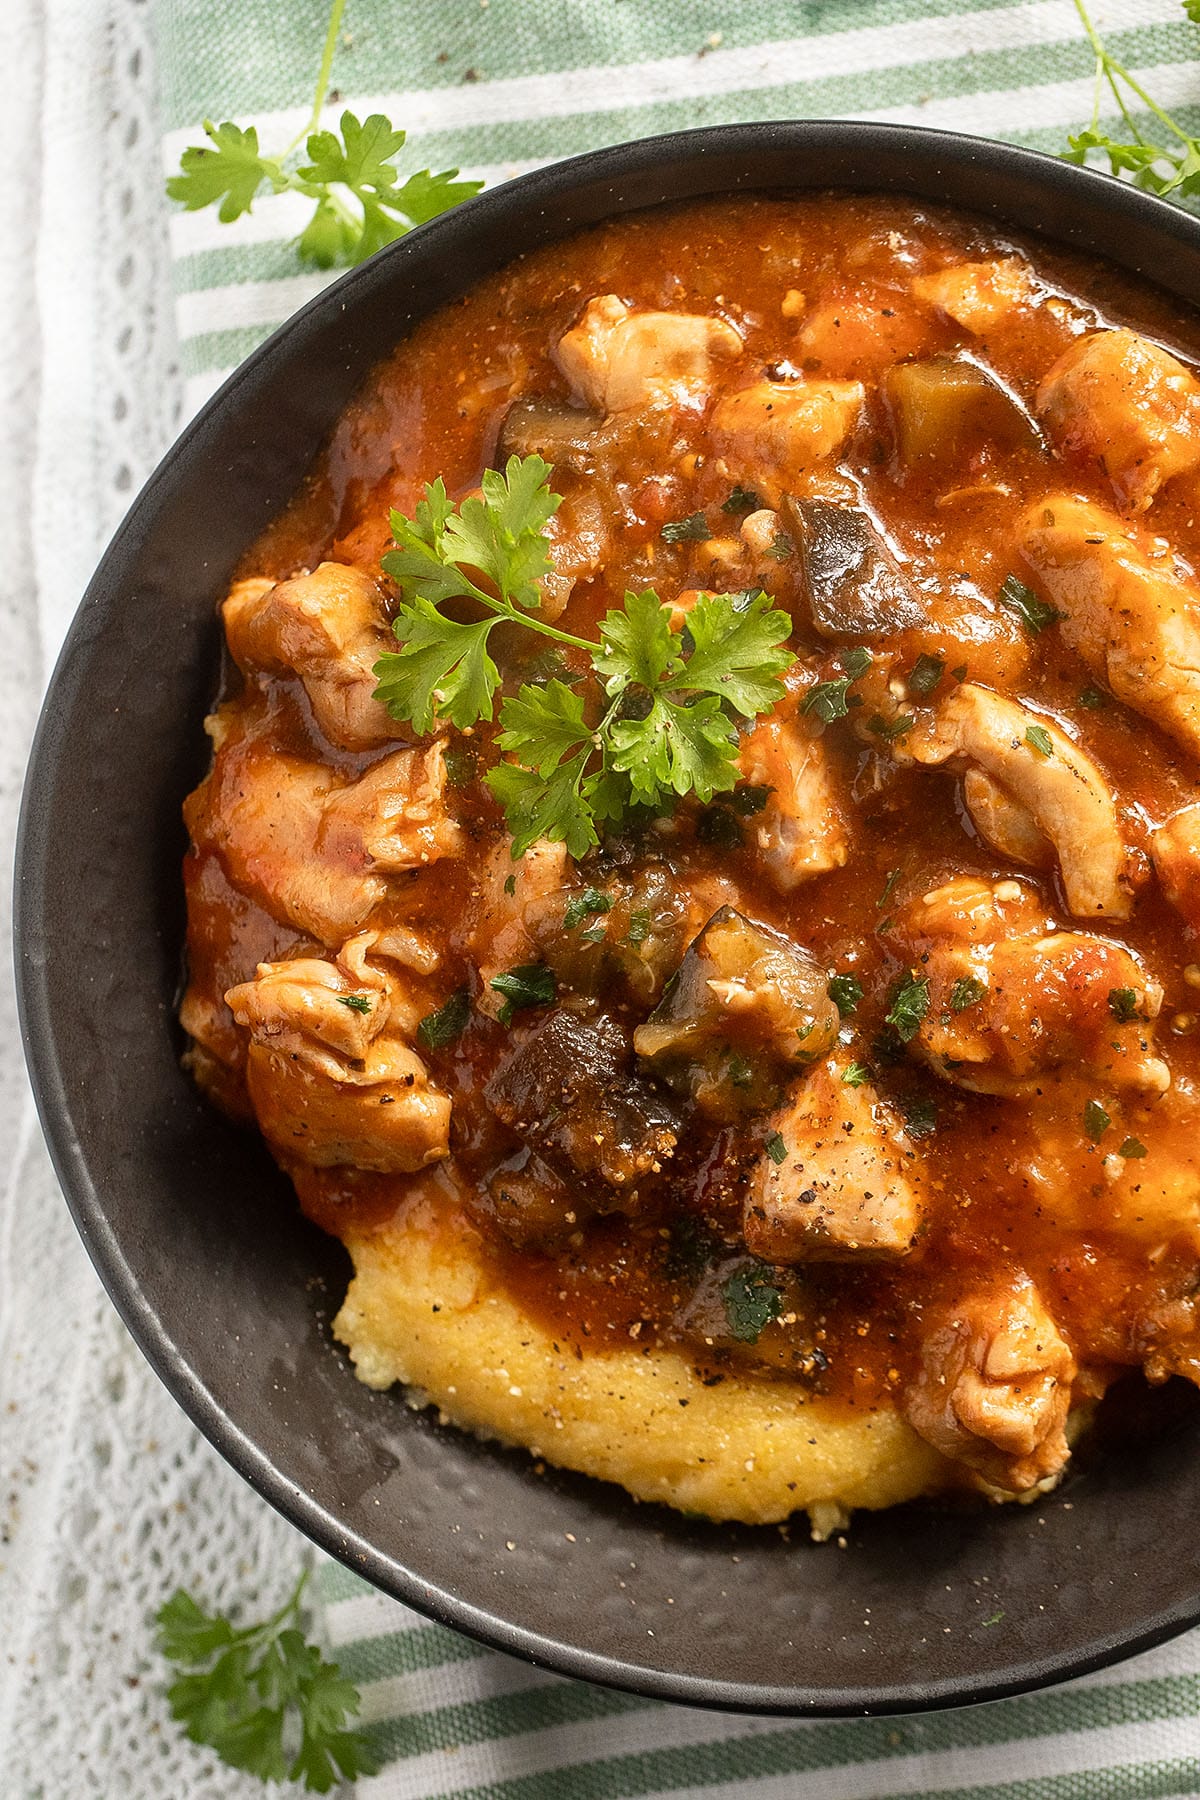 close up of chicken and eggplants in a bowl over polenta.